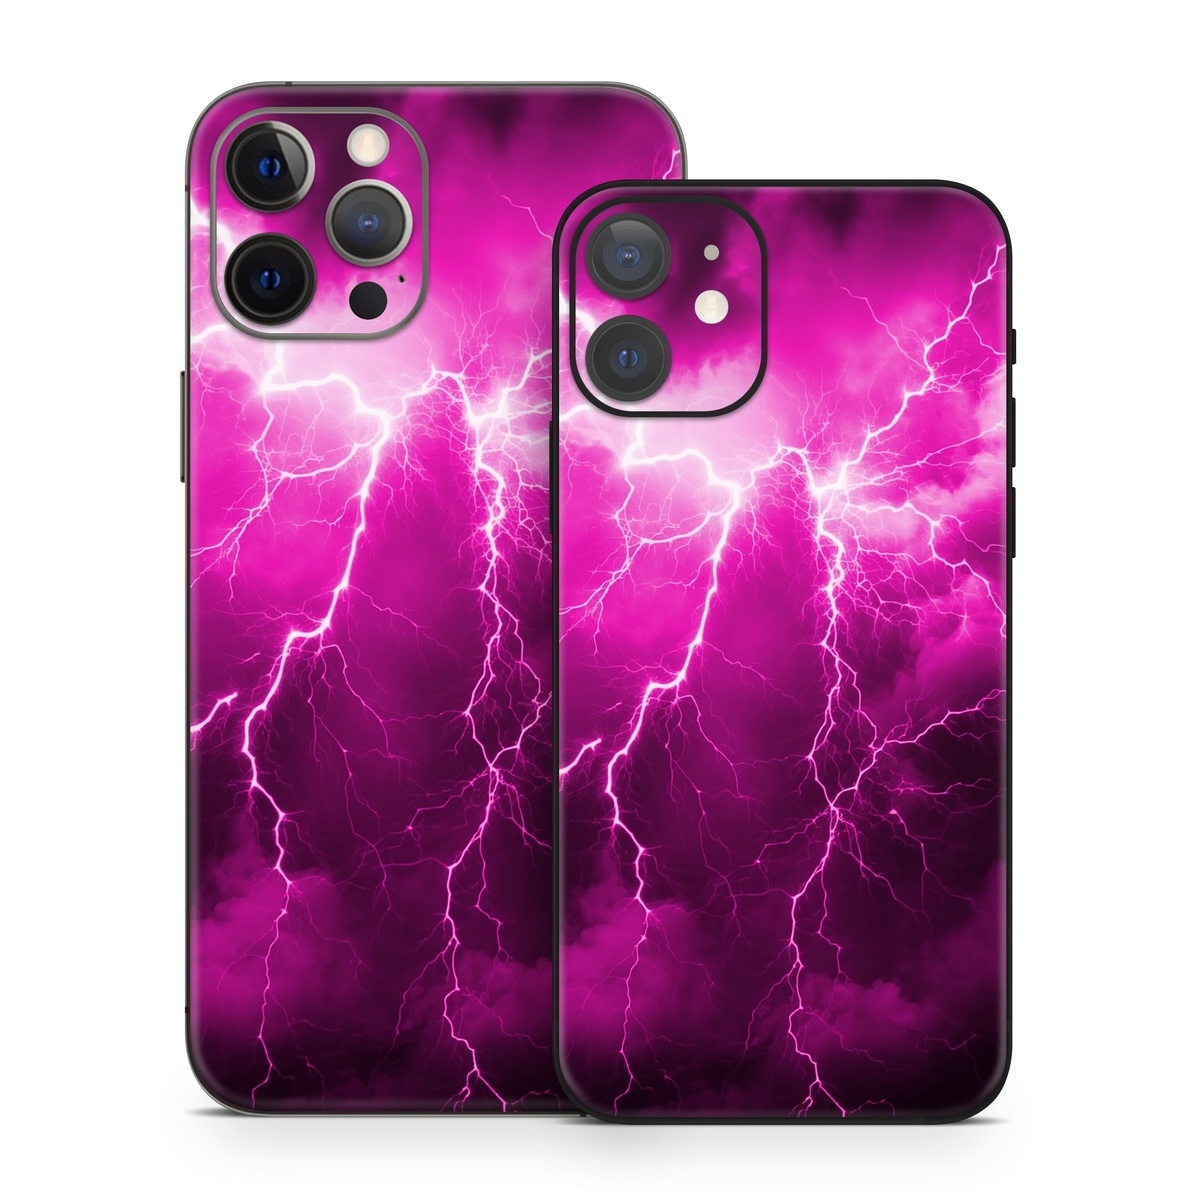 iPhone 12 Series Skin design of Sky, Thunder, Lightning, Thunderstorm, Atmosphere, White, Purple, Light, Nature, Water, with black, pink colors